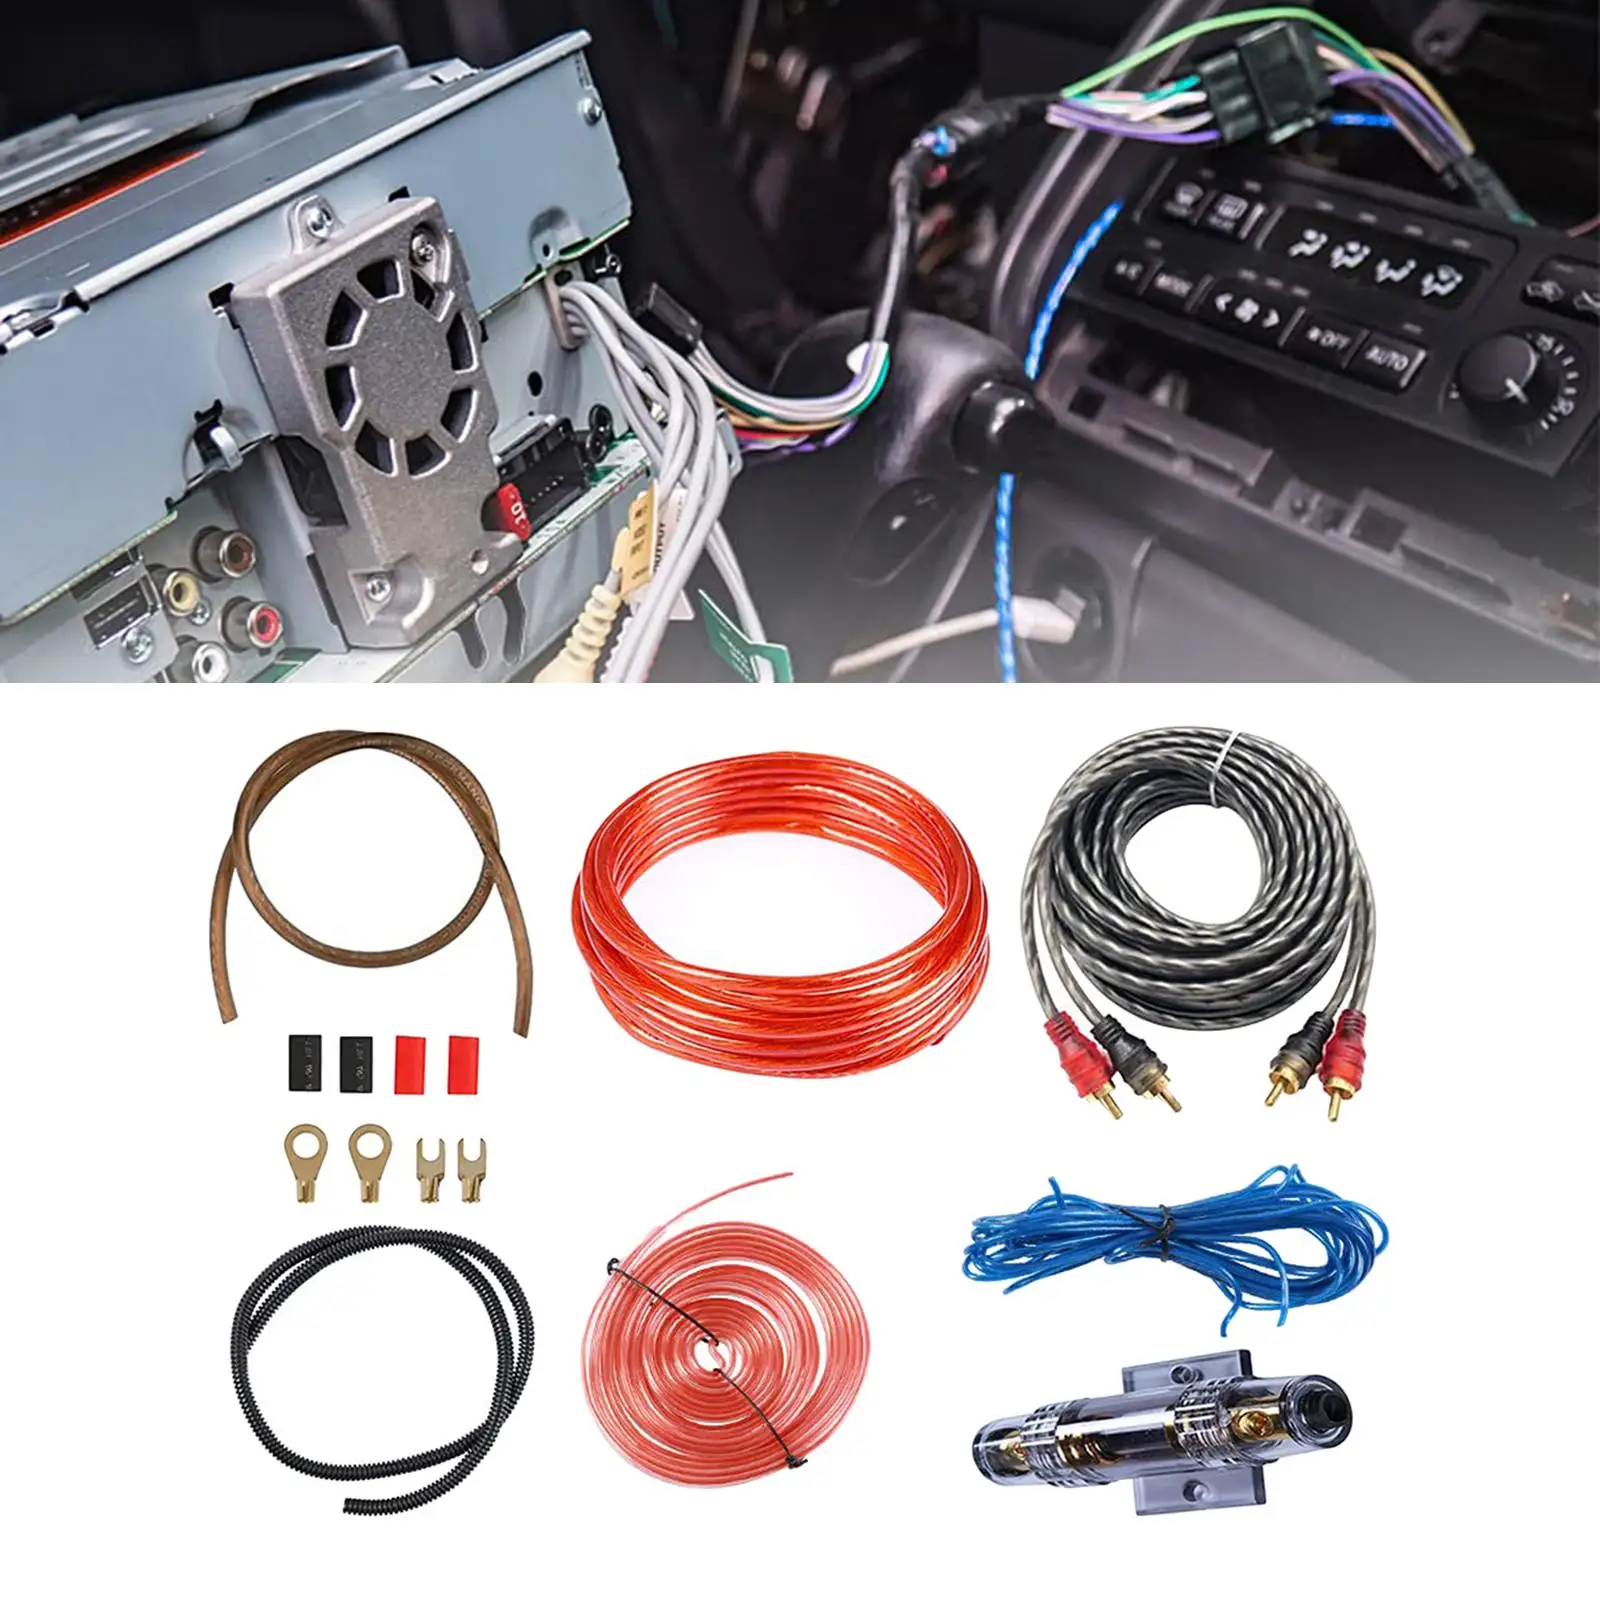 Car Audio Wiring Kit Installation Kit with Fuse Holder Speaker Cables Electrical